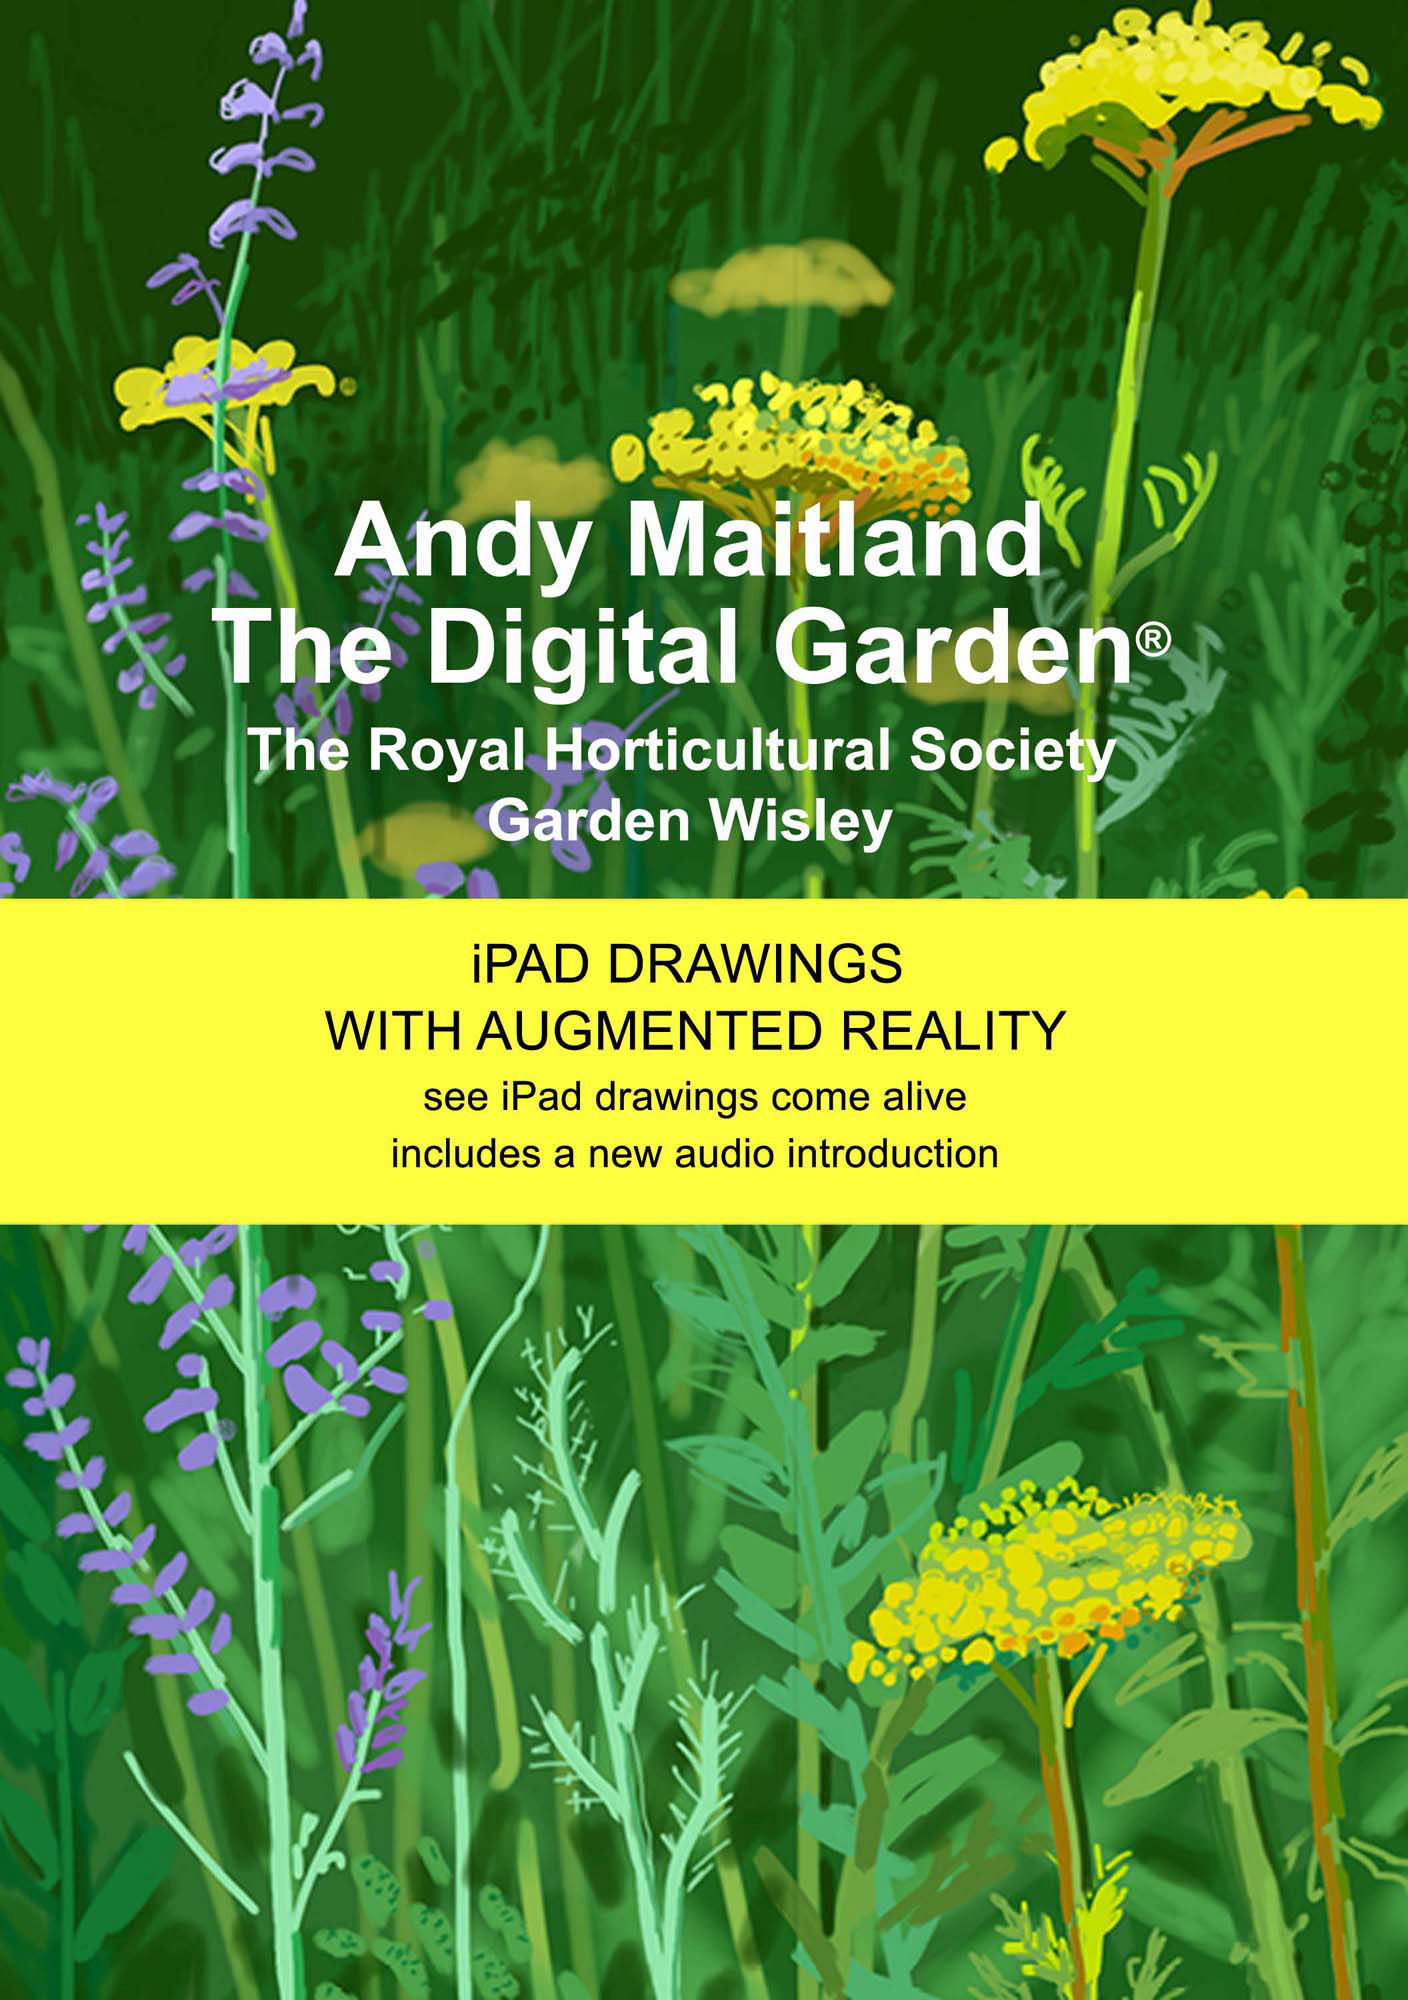 Andy Maitland, Publication, ‘Andy Maitland, The Digital Garden® 2018, iPad drawings with Augmented Reality at the Royal Horticultural Society’ book cover